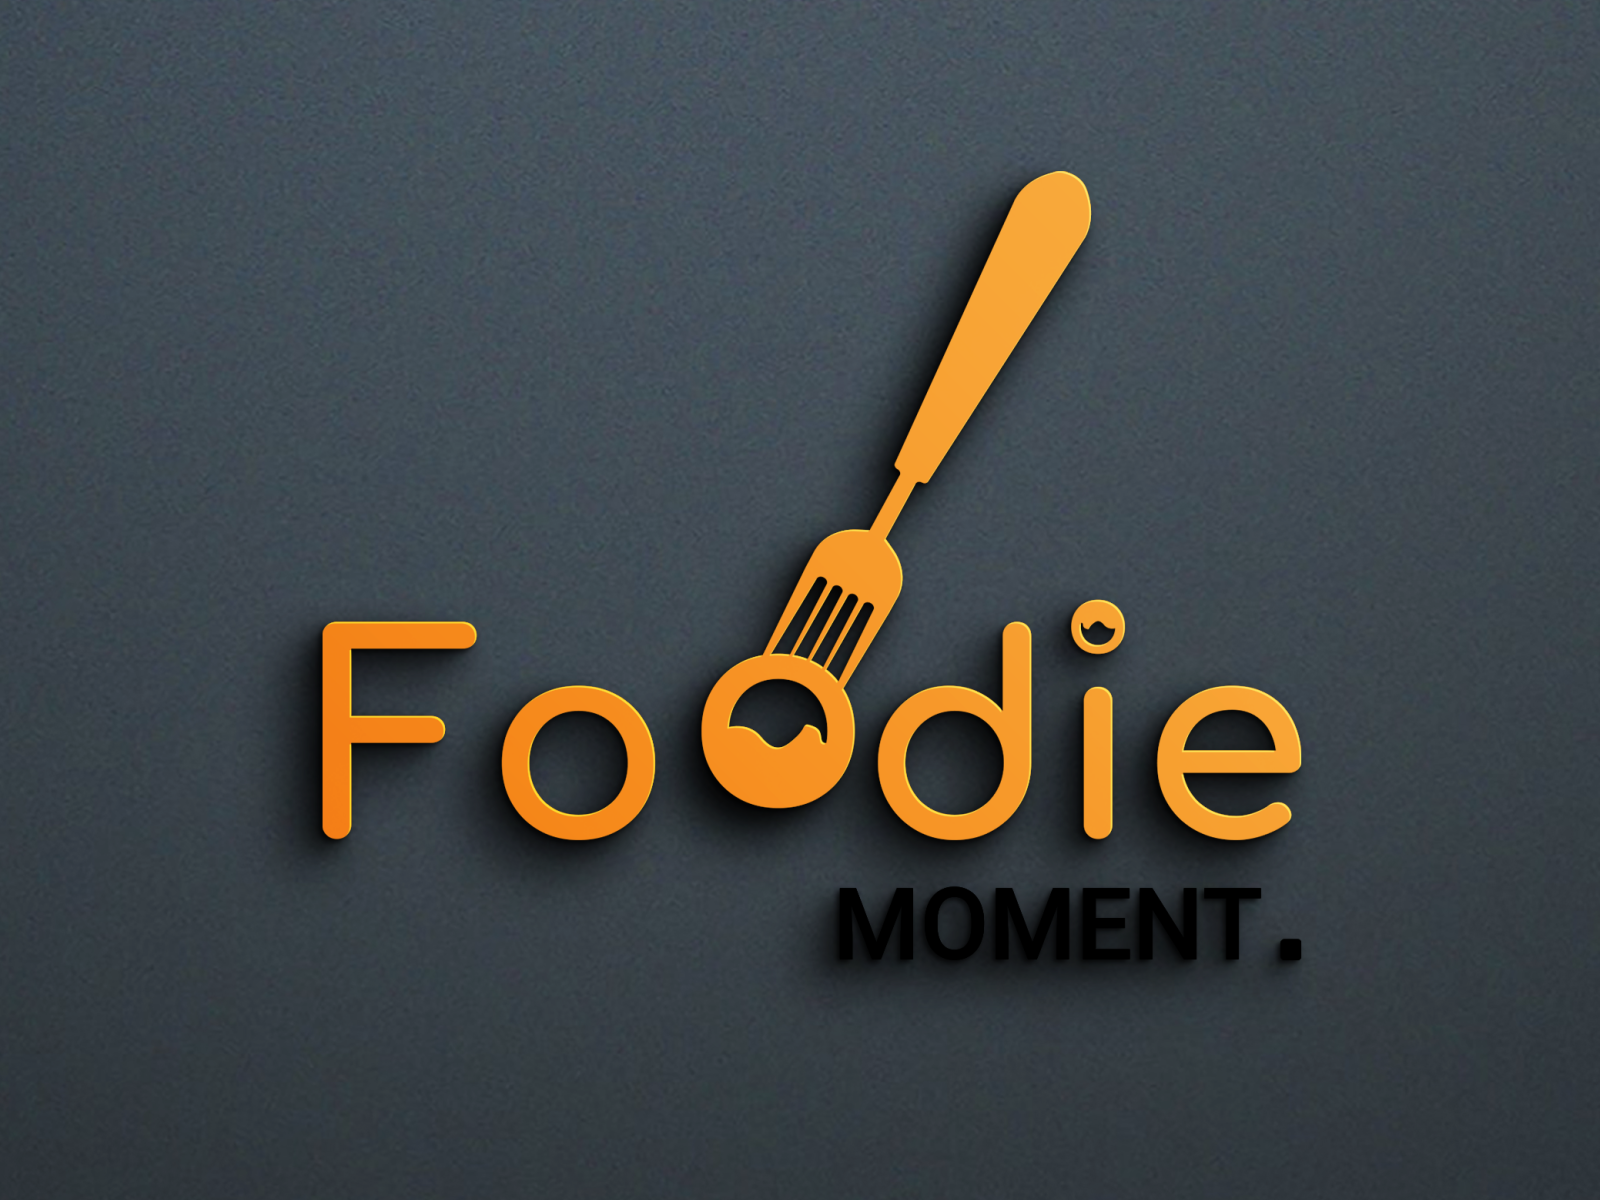 Foodie Moment Logo Design by Tanvir Ahammed on Dribbble